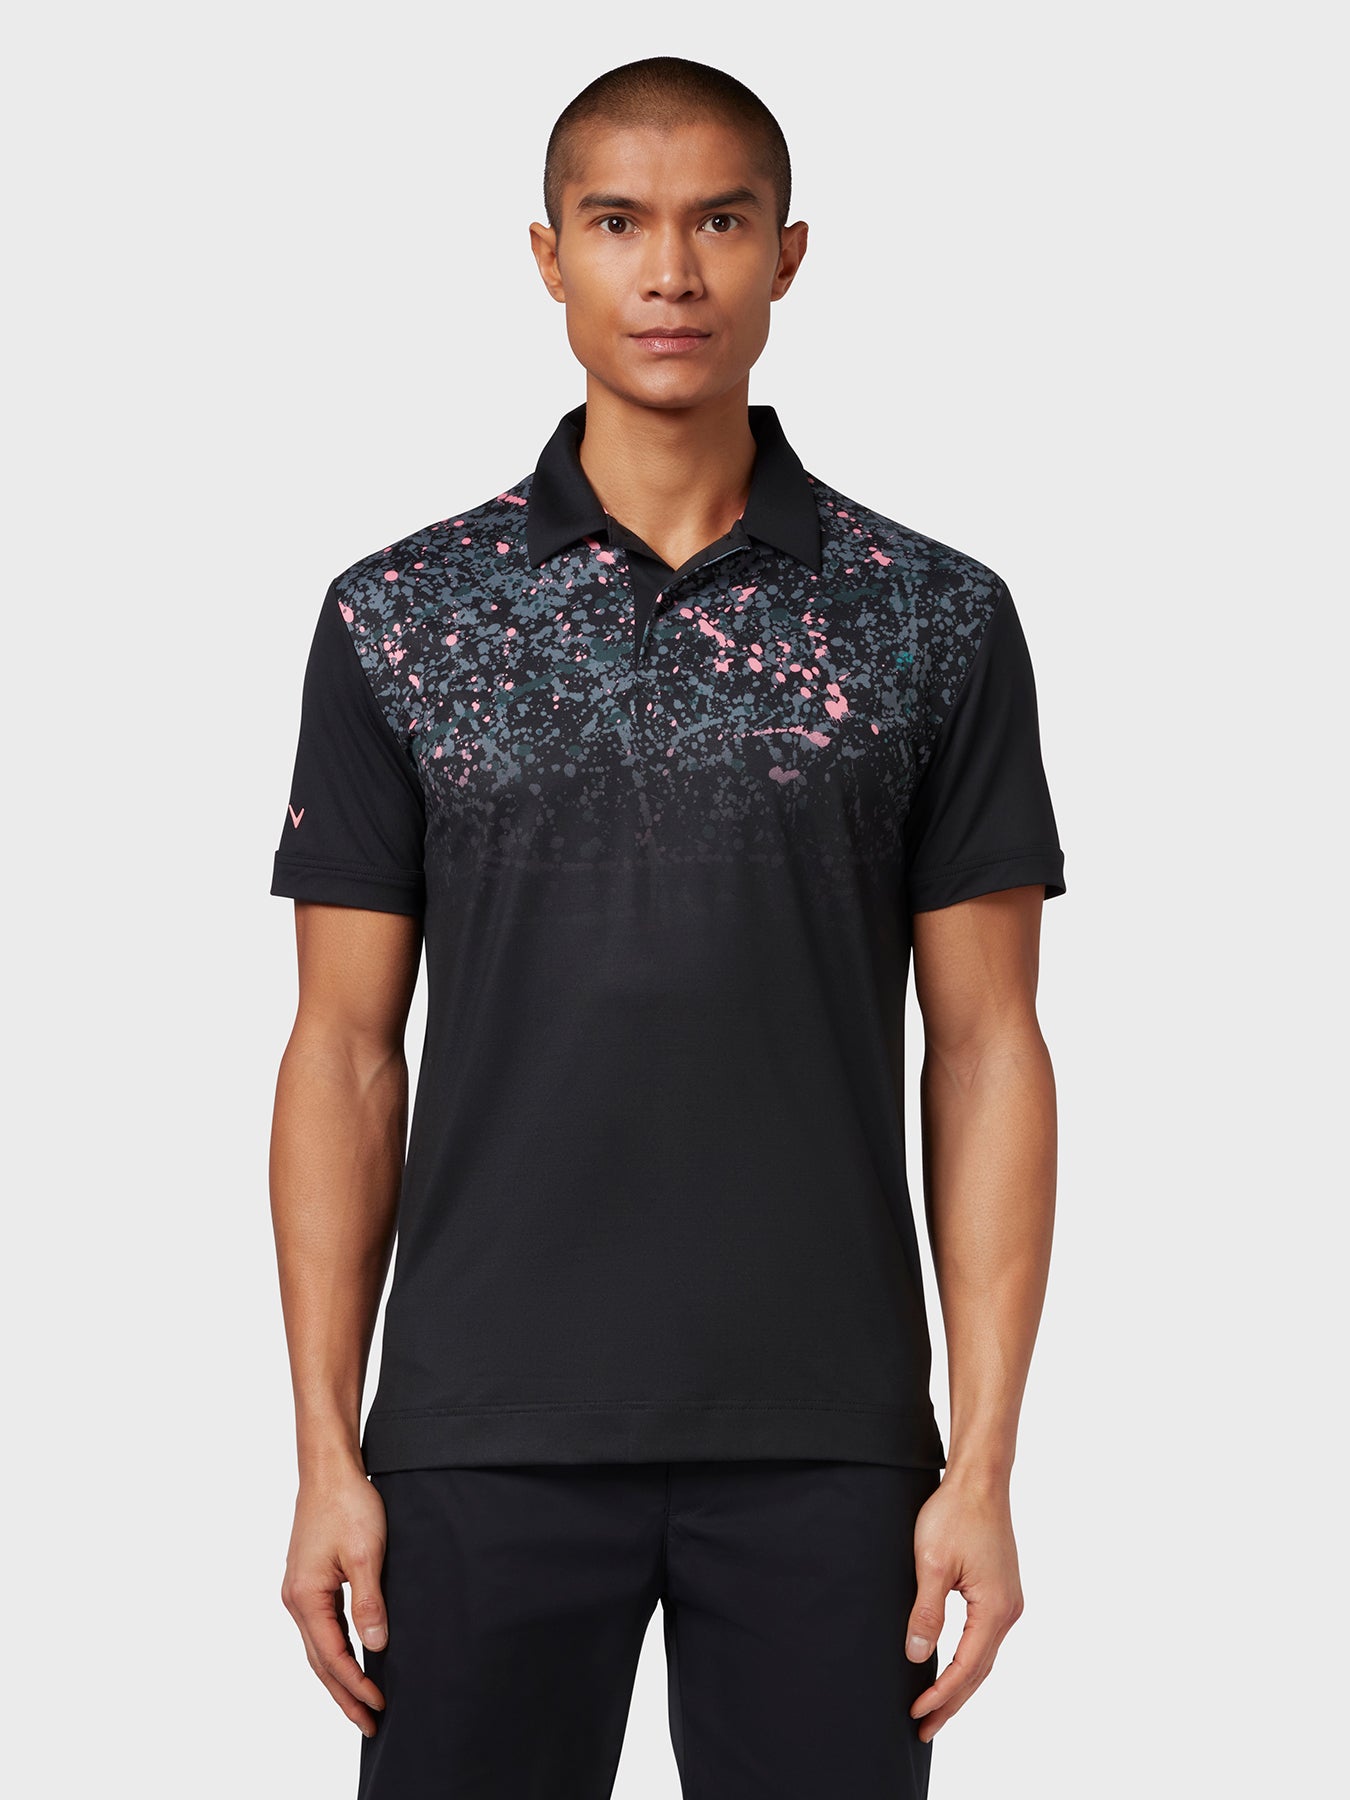 View X Series Splatter Paint Ombre Polo In Caviar Caviar XS information